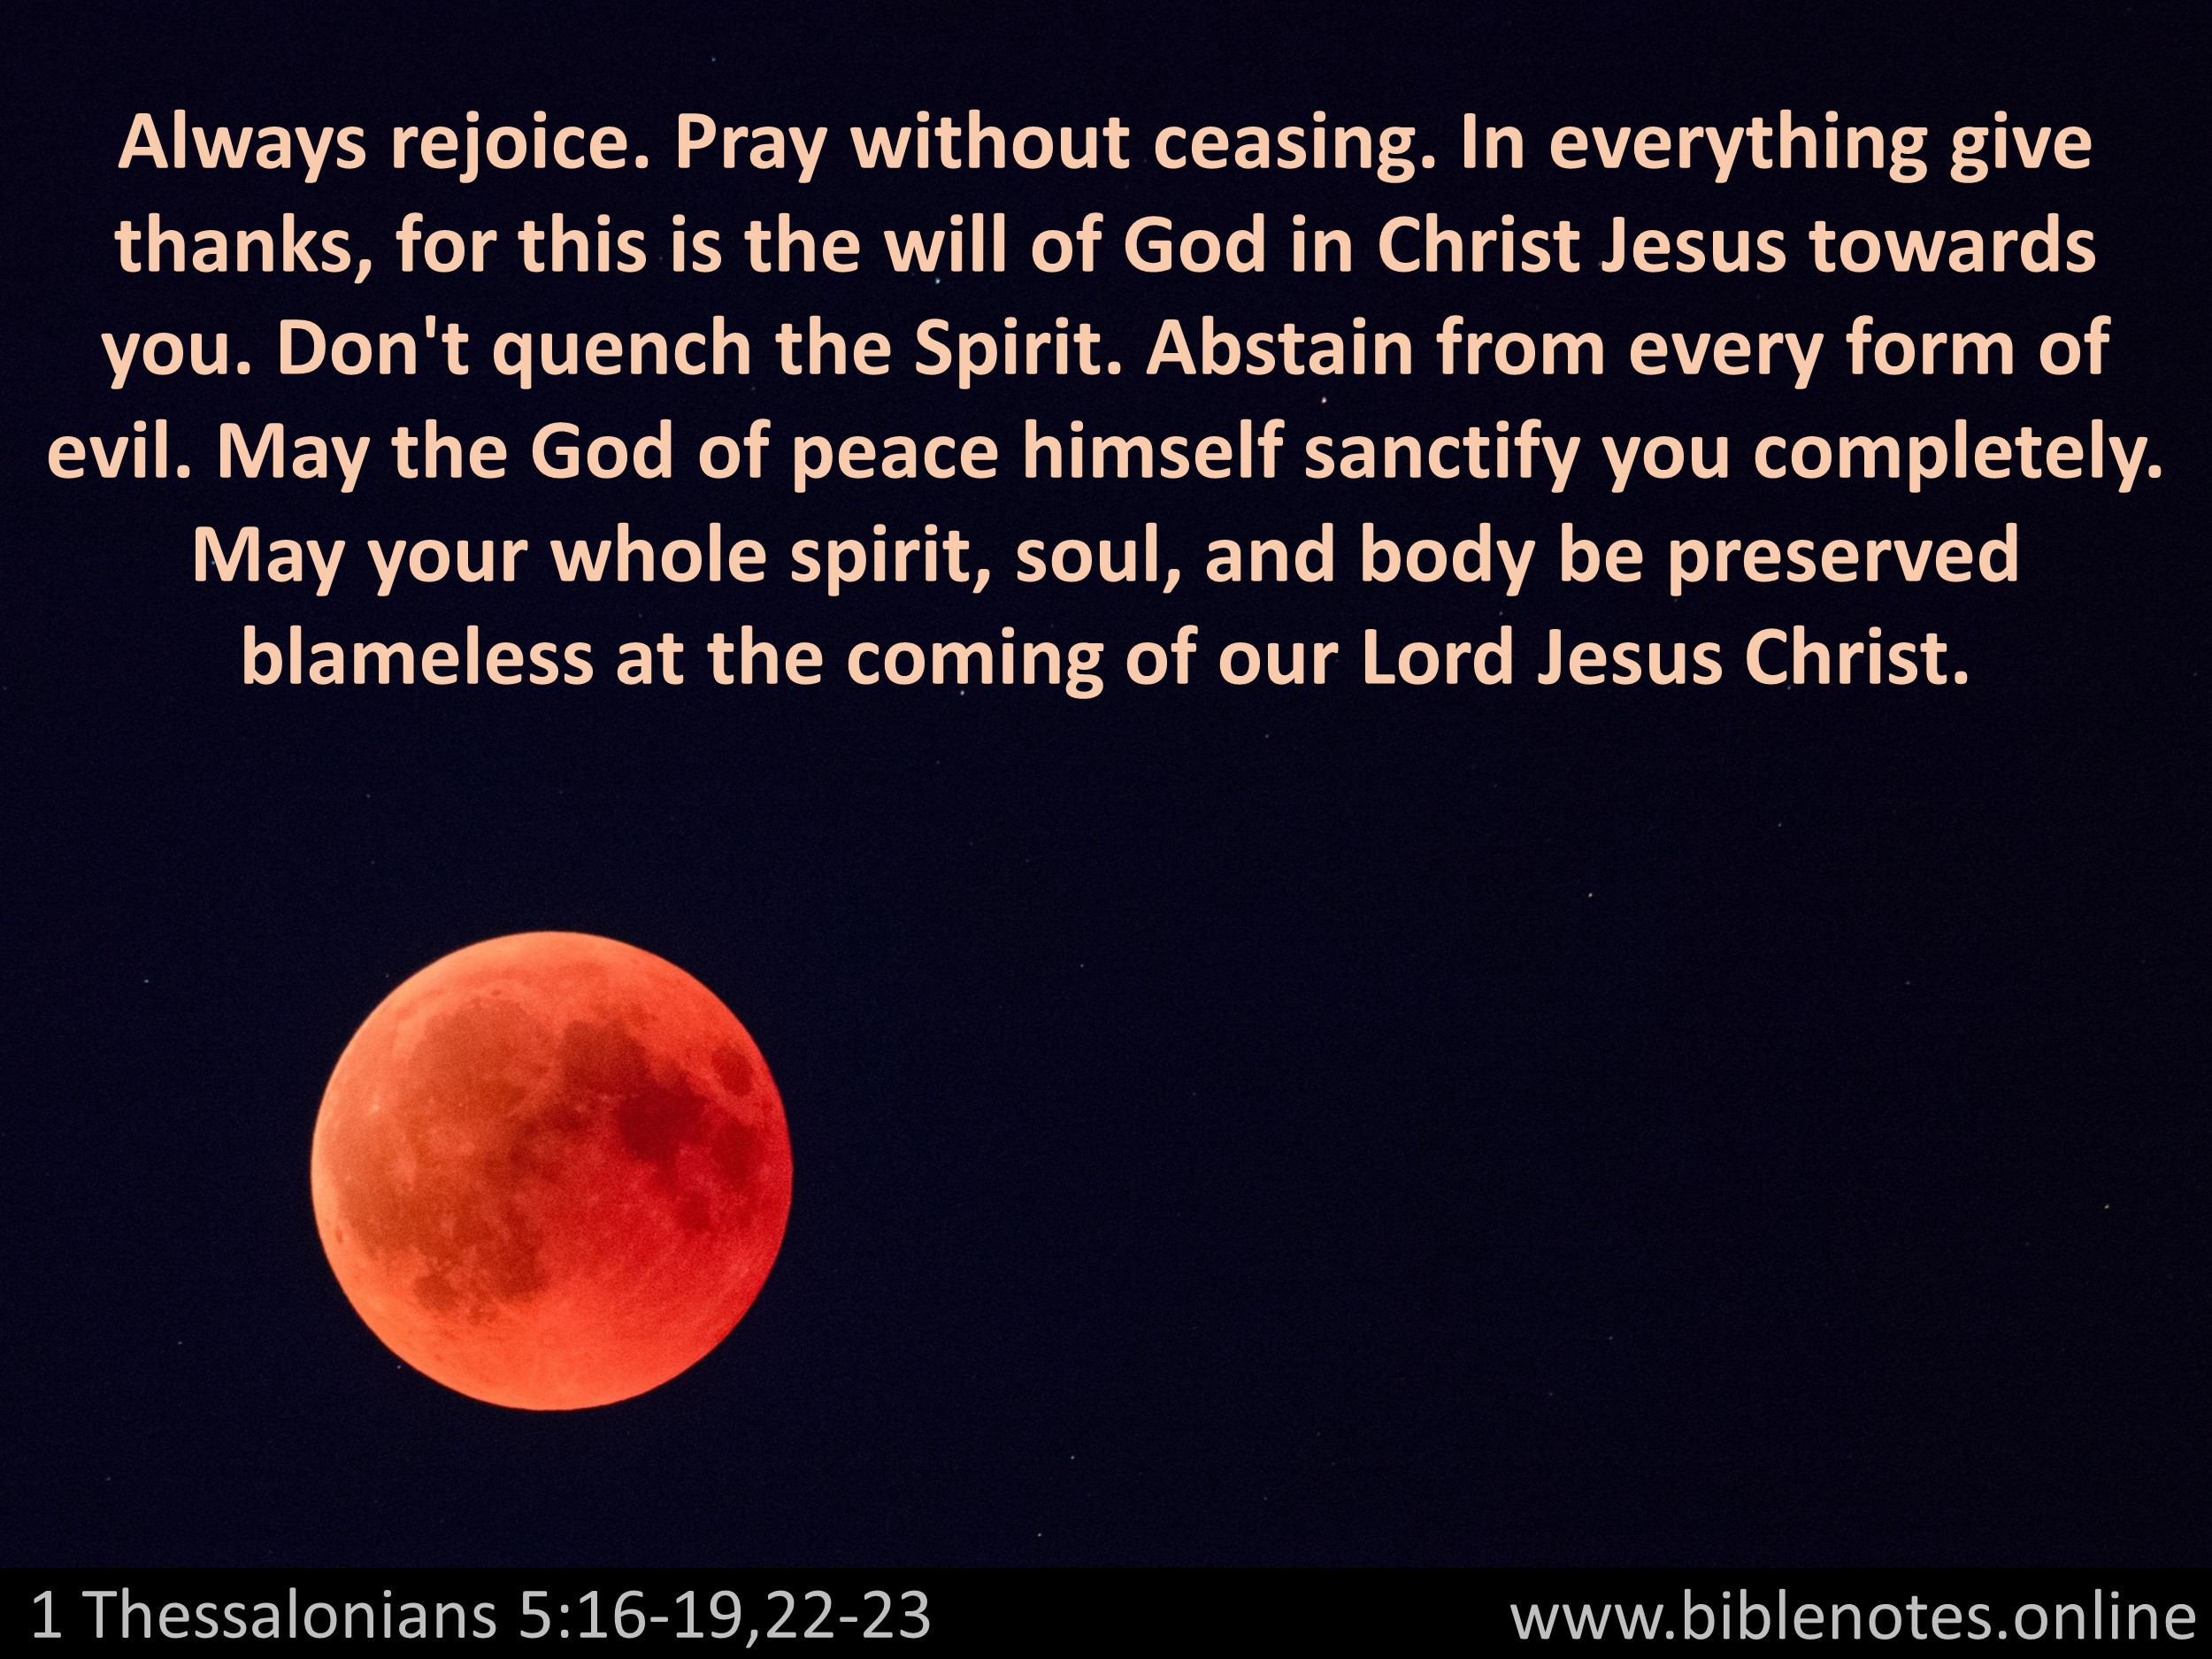 Bible Verse from 1 Thessalonians Chapter 5